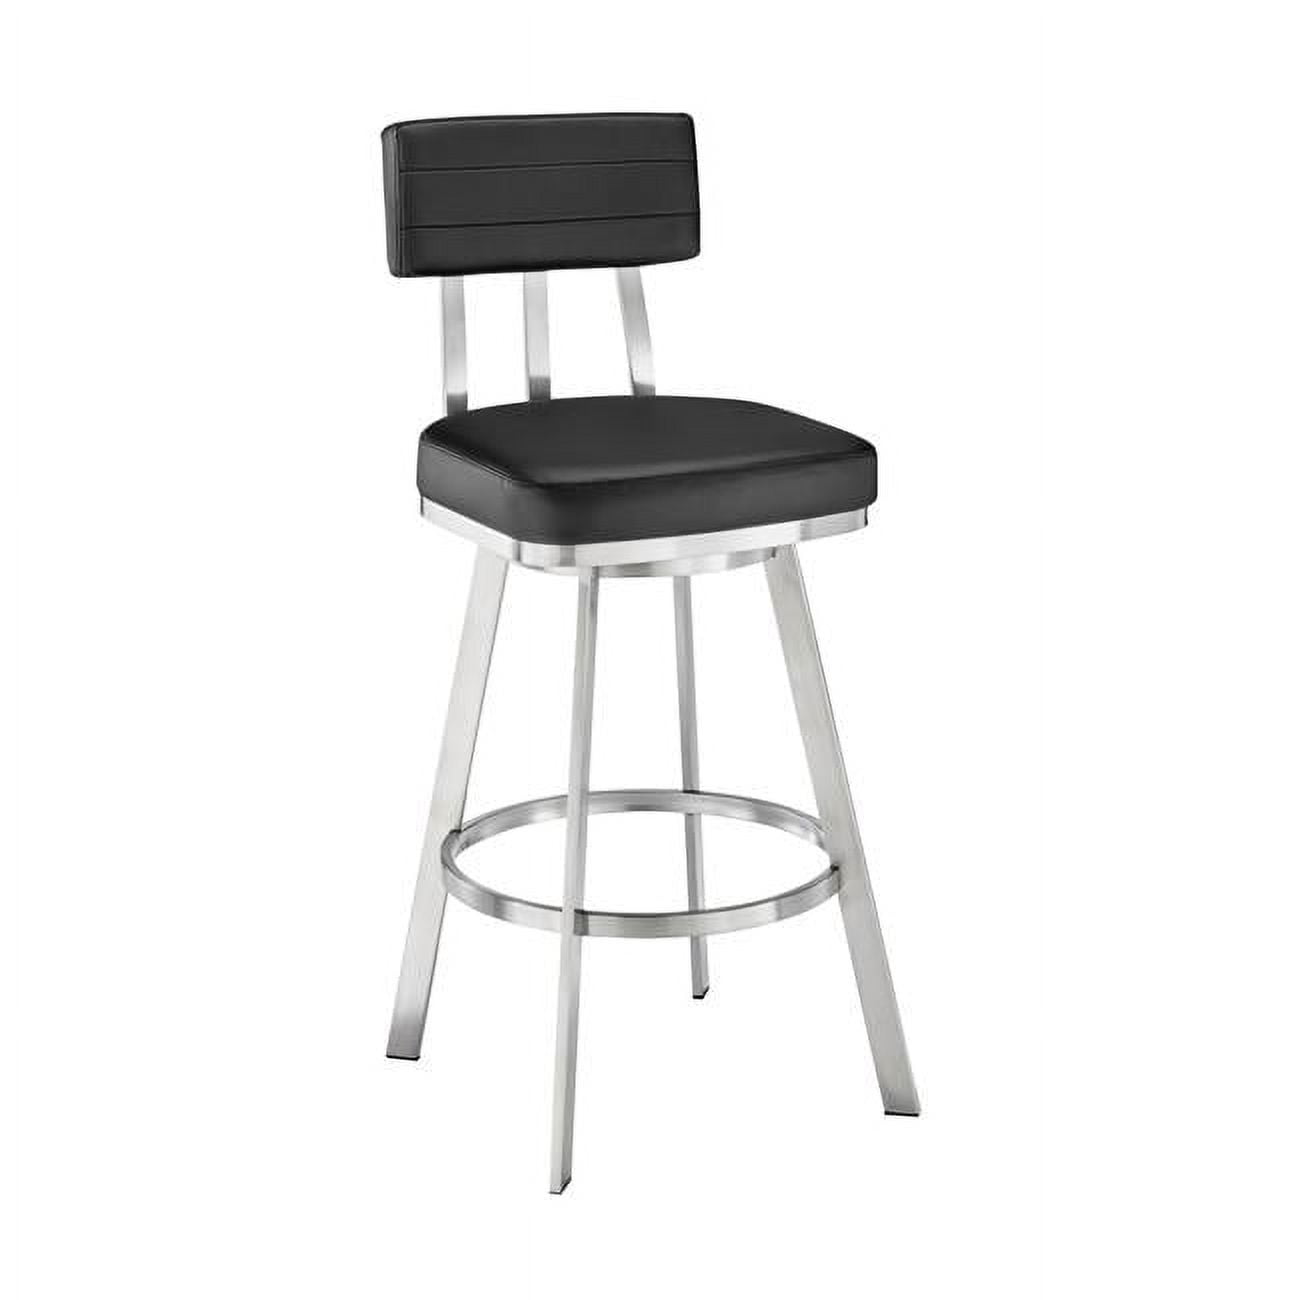 Picture of Armen Living 840254335264 38 x 17.5 x 21 in. Jinab Swivel Counter Stool in Brushed Stainless Steel with Black Faux Leather